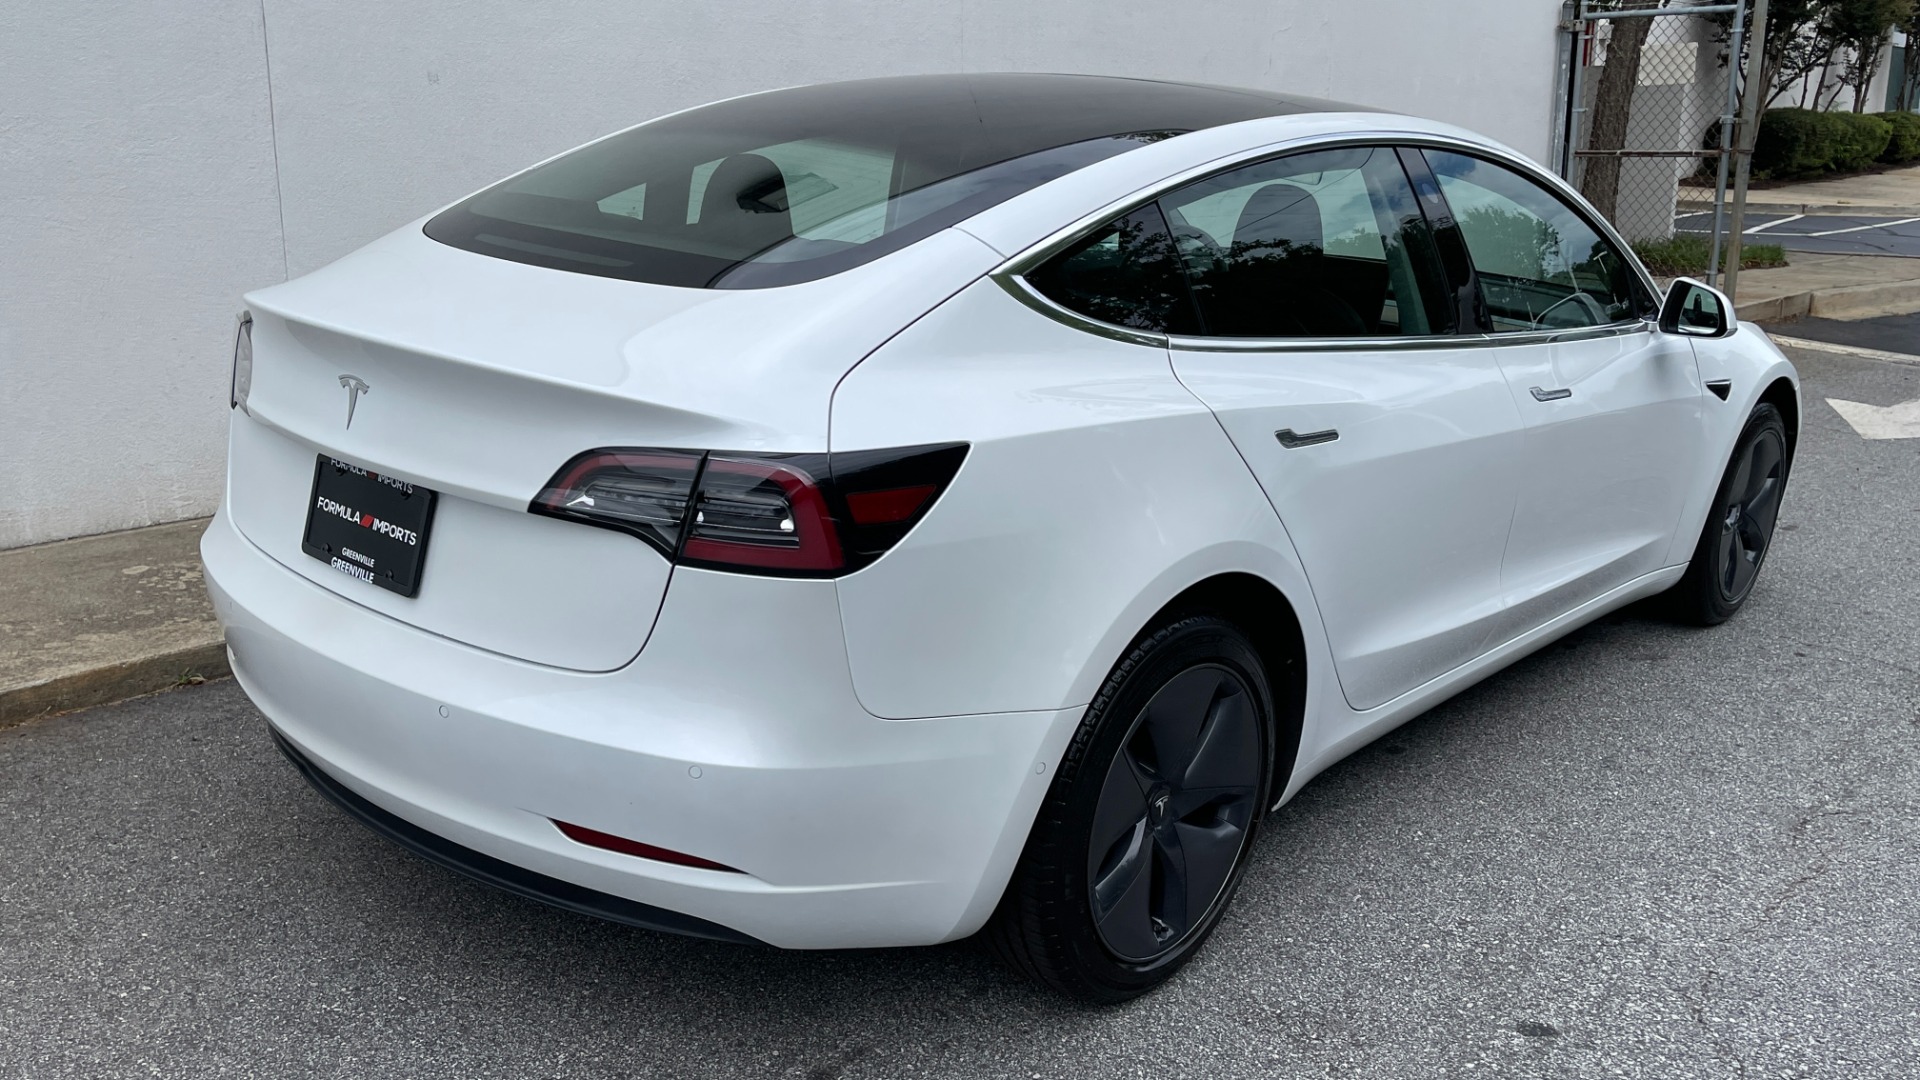 Used 2020 Tesla Model 3 STANDARD RANGE PLUS / AUTOPILOT / STANDARD CONNECTIVITY / PEARL WHITE for sale $49,595 at Formula Imports in Charlotte NC 28227 2